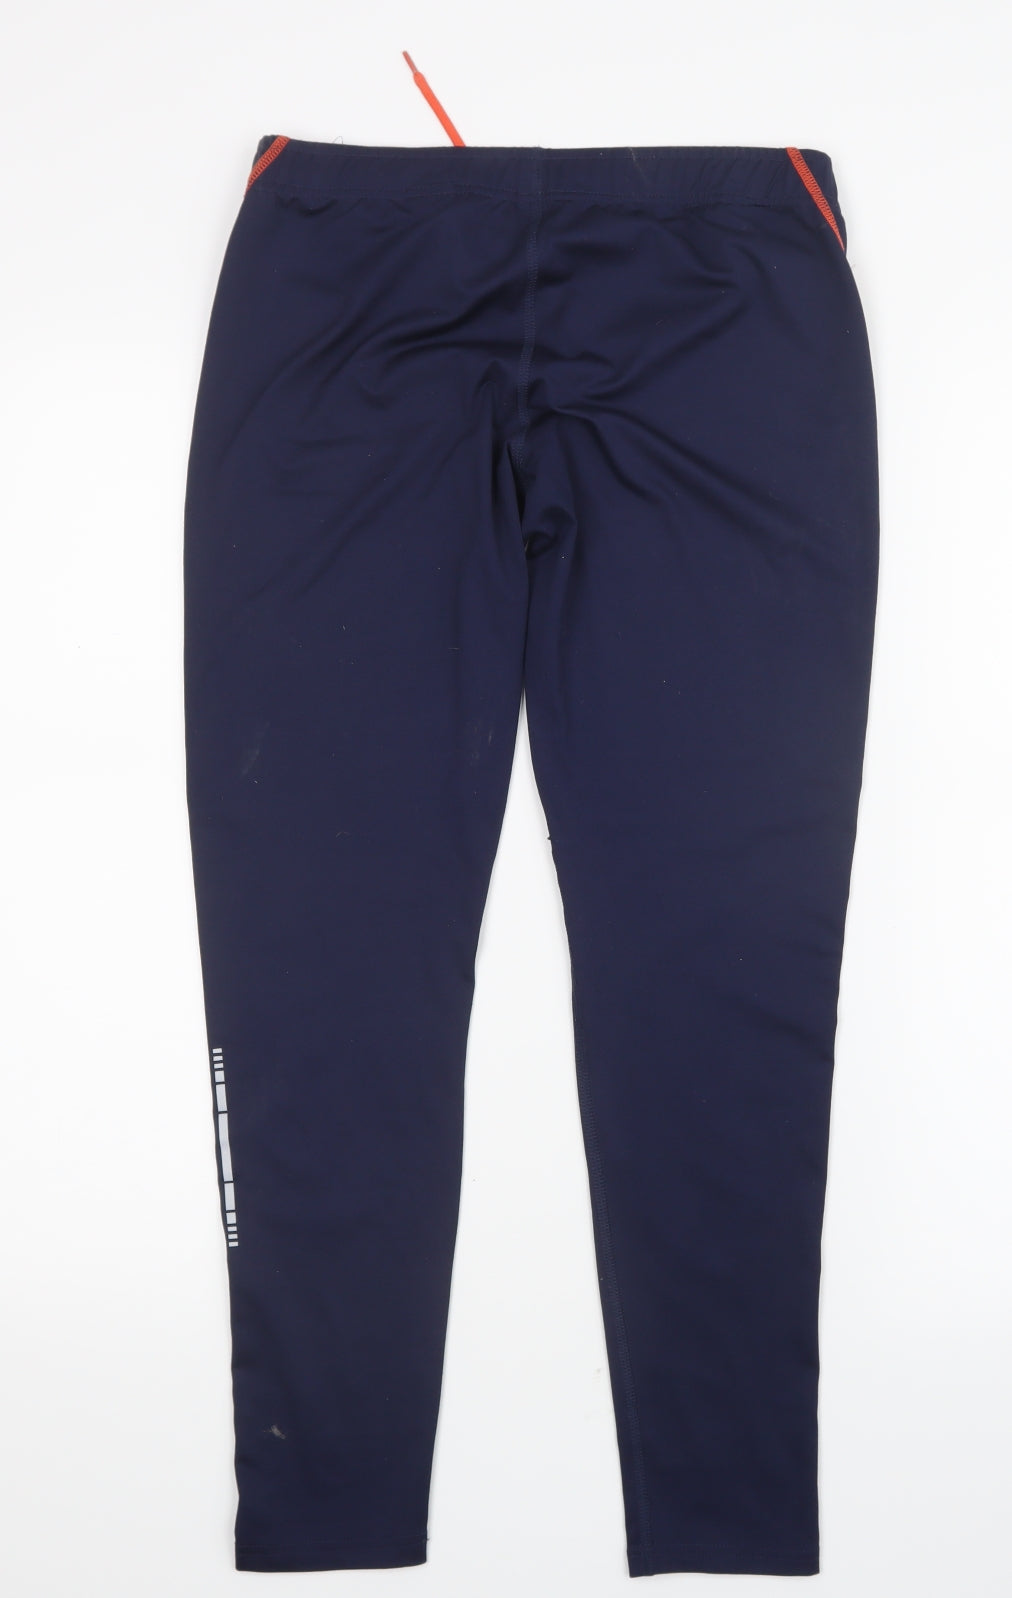 Athletic Works Womens Blue Polyester Jogger Leggings Size M L26 in